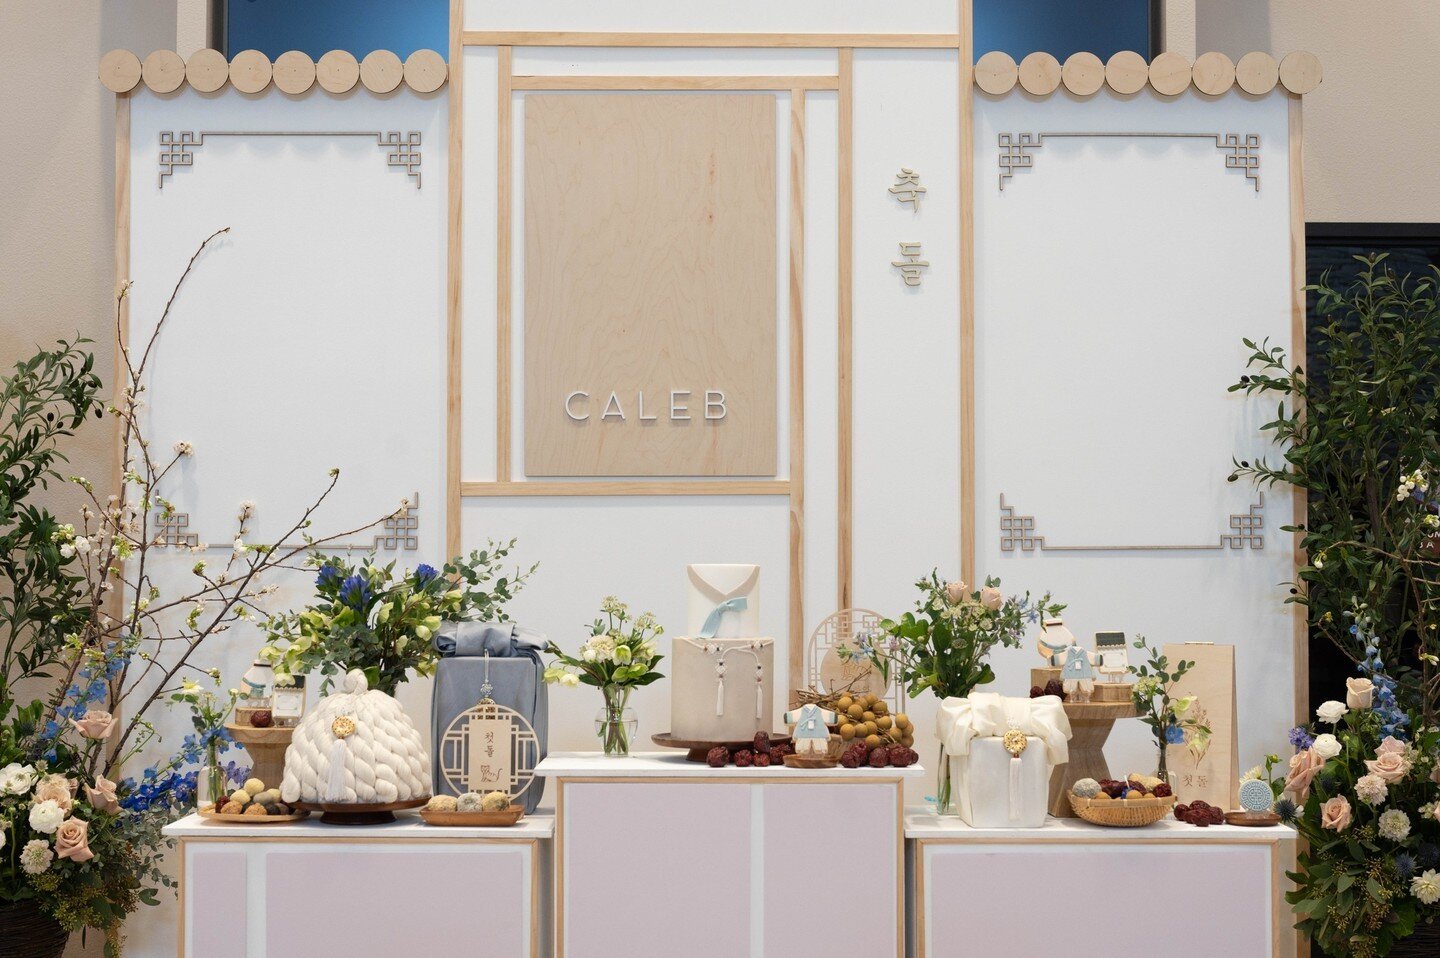 Caleb's first birthday celebration was a captivating blend of cultural heritage and architectural splendor. Requested by Caleb's mom, an architect with a deep appreciation for Korean architecture, the party took on a distinctive touch by incorporatin